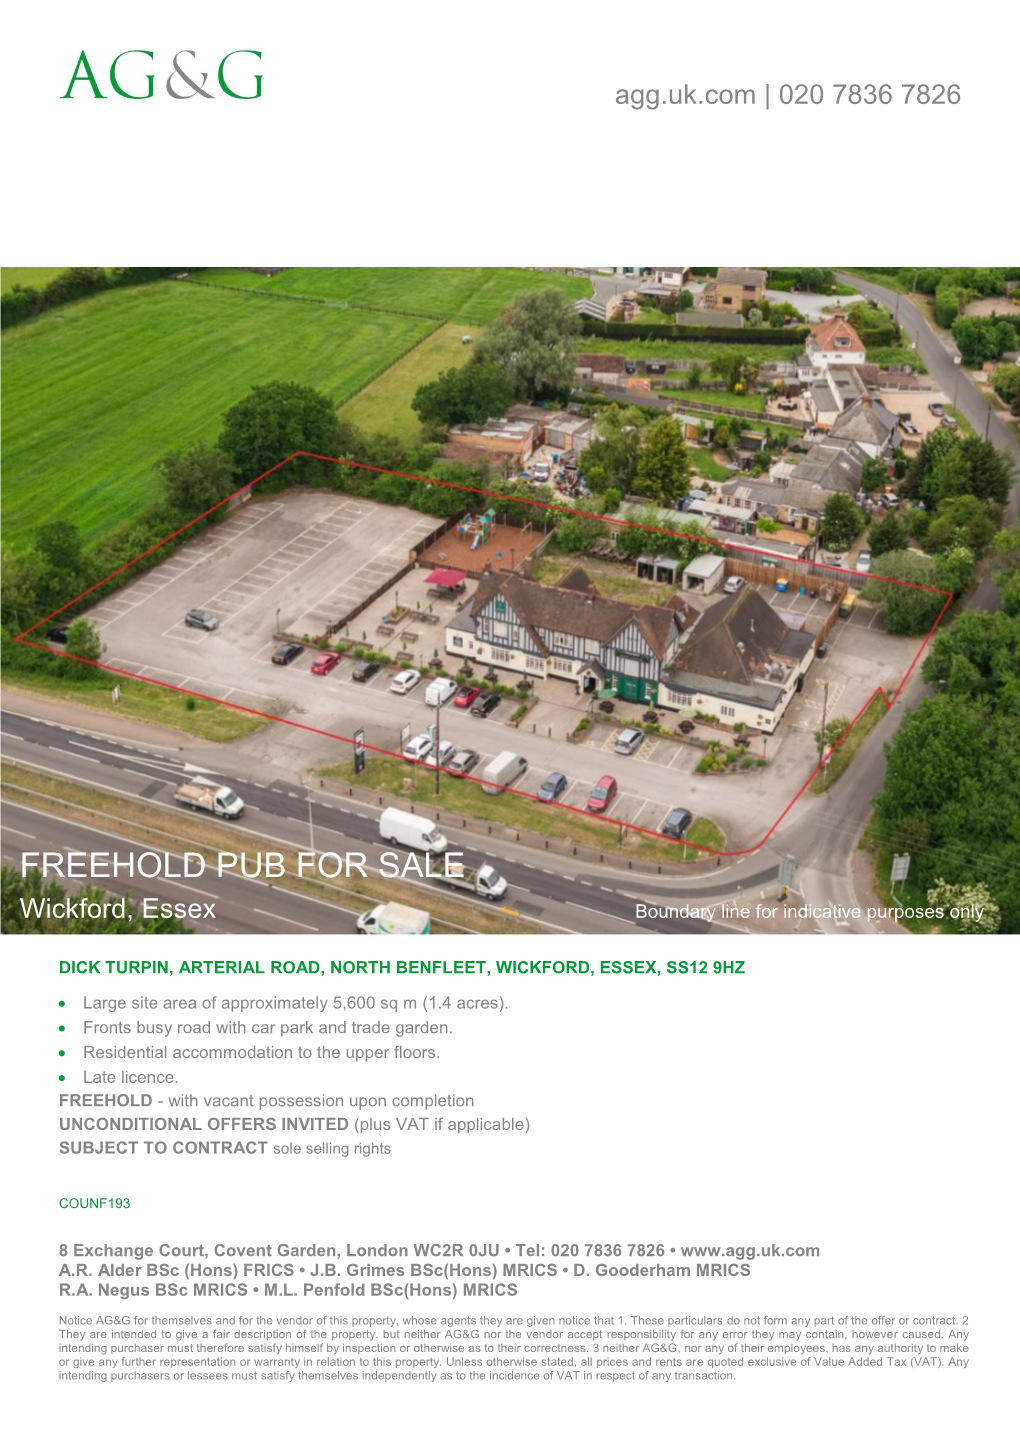 FREEHOLD PUB for SALE Wickford, Essex Boundary Line for Indicative Purposes Only